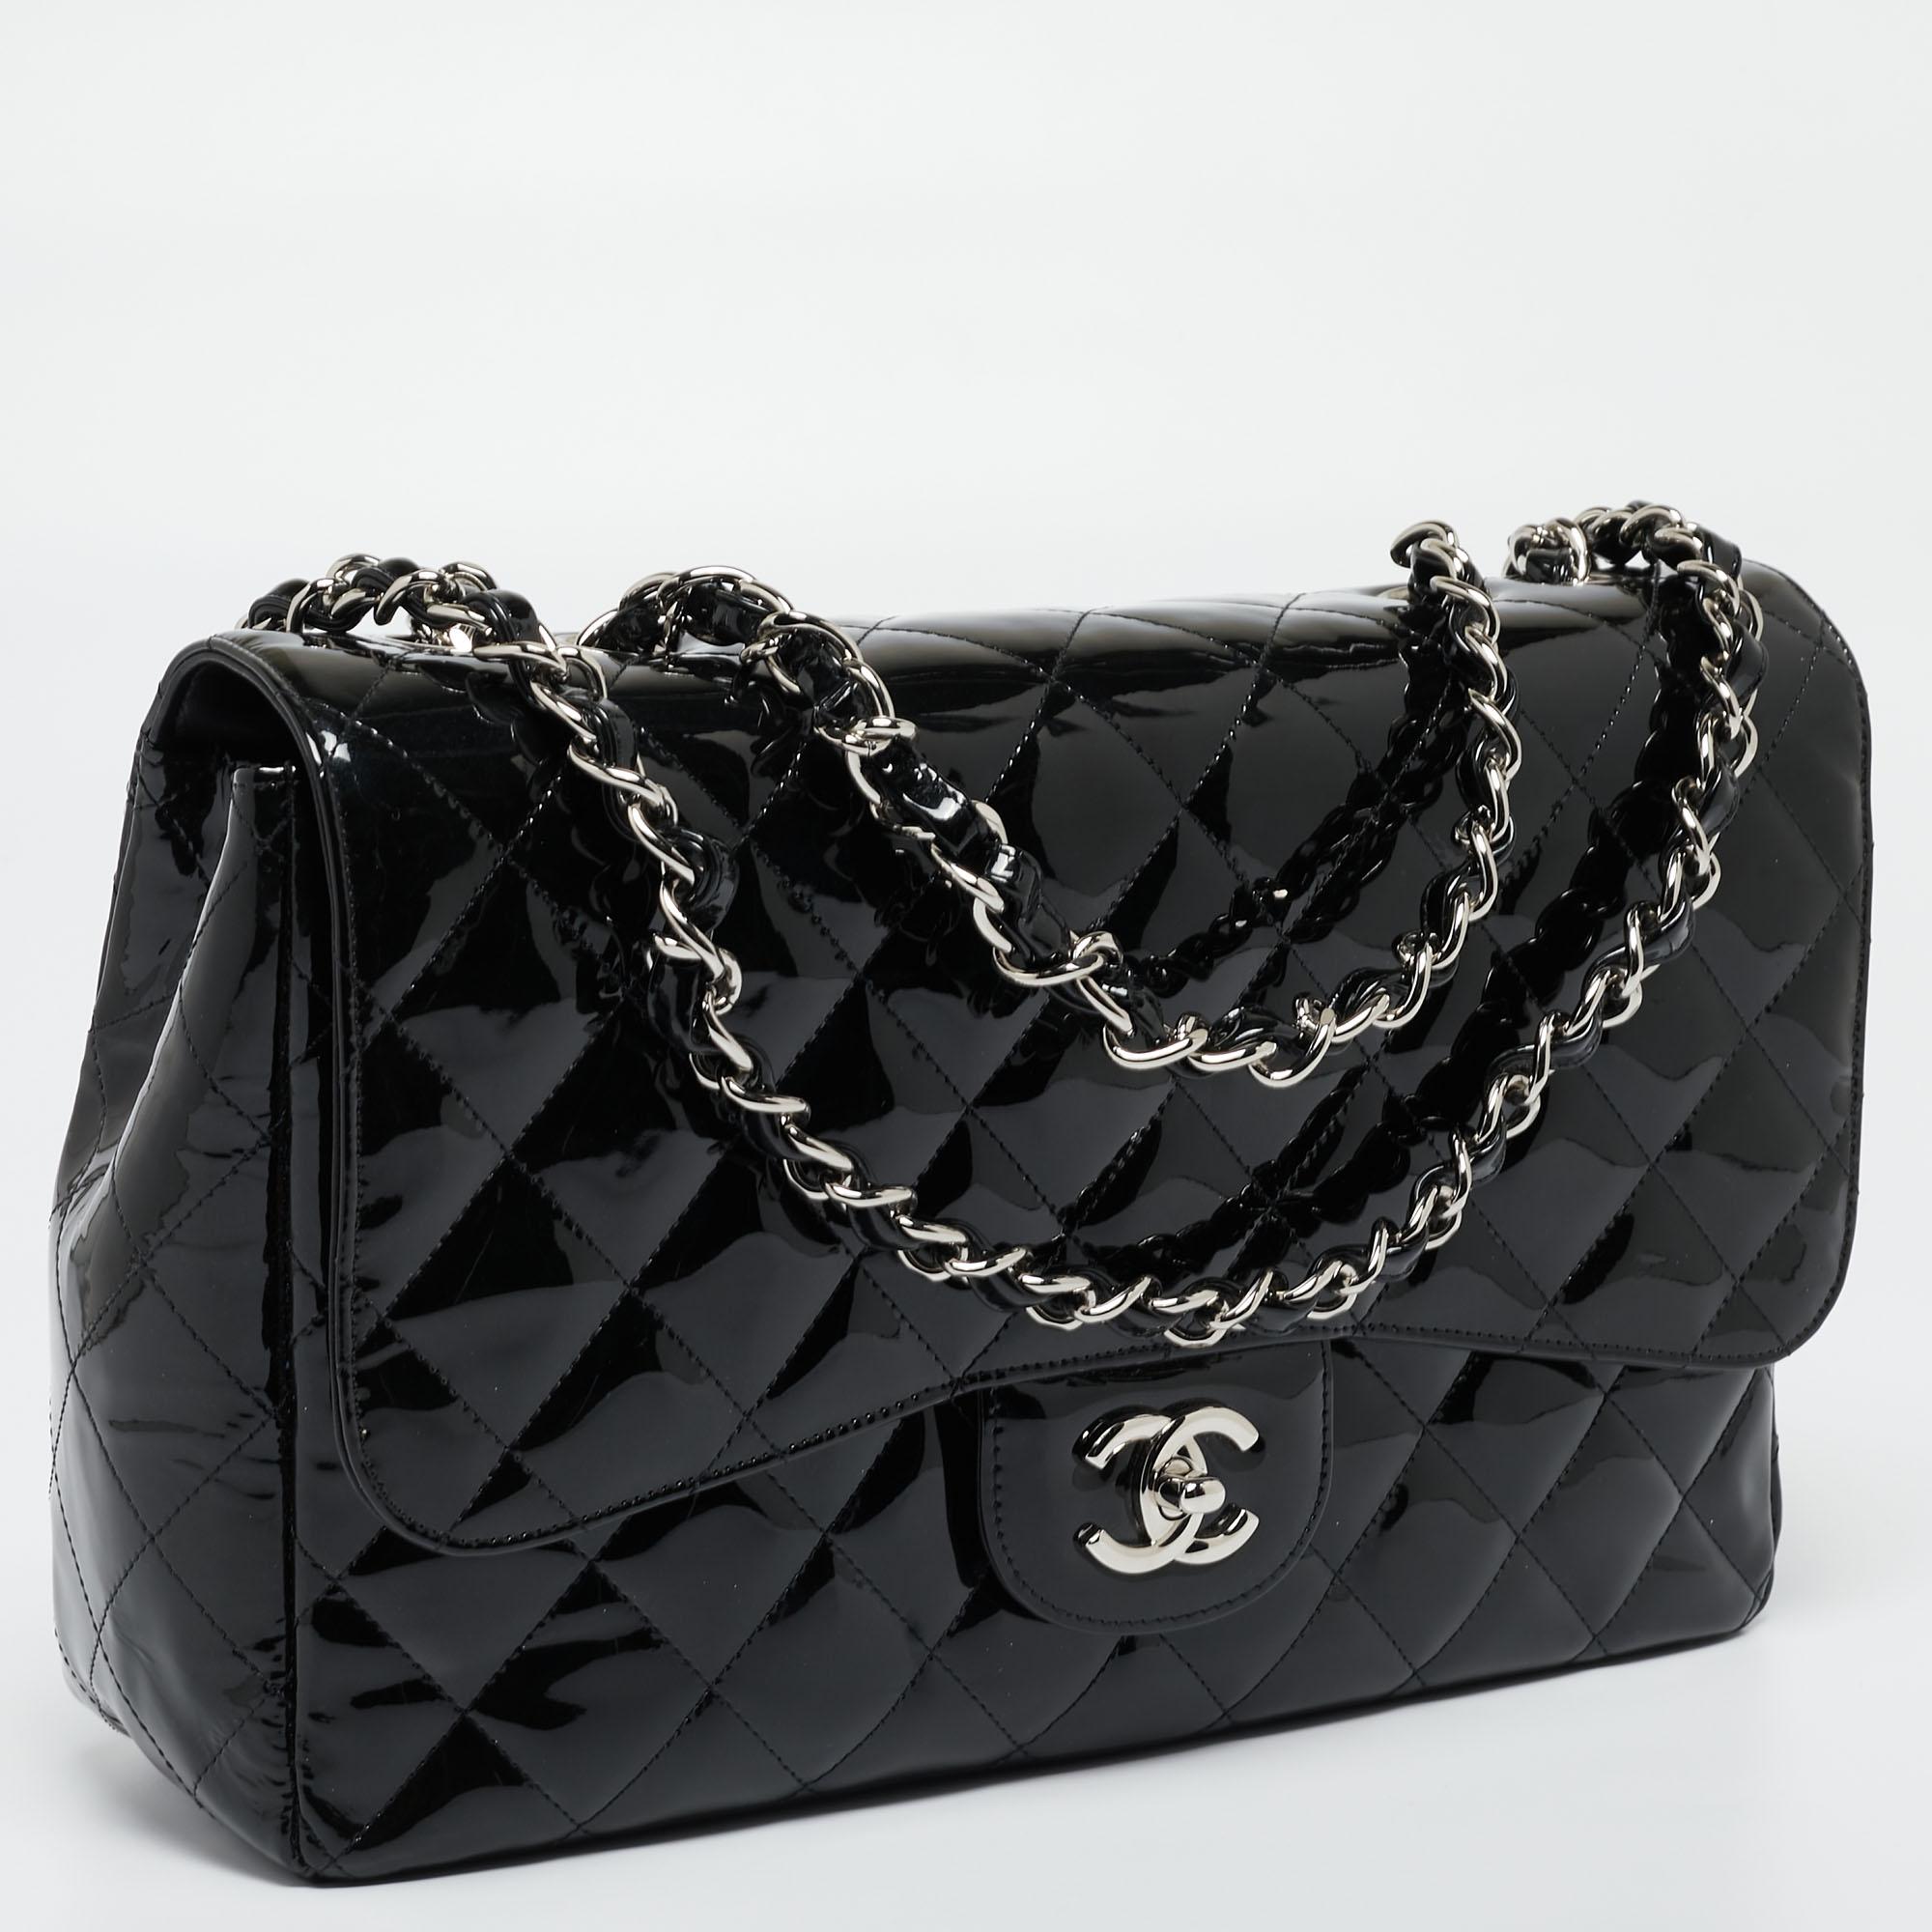 Women's Chanel Metallic Black Quilted Patent Leather Jumbo Classic Single Flap Bag